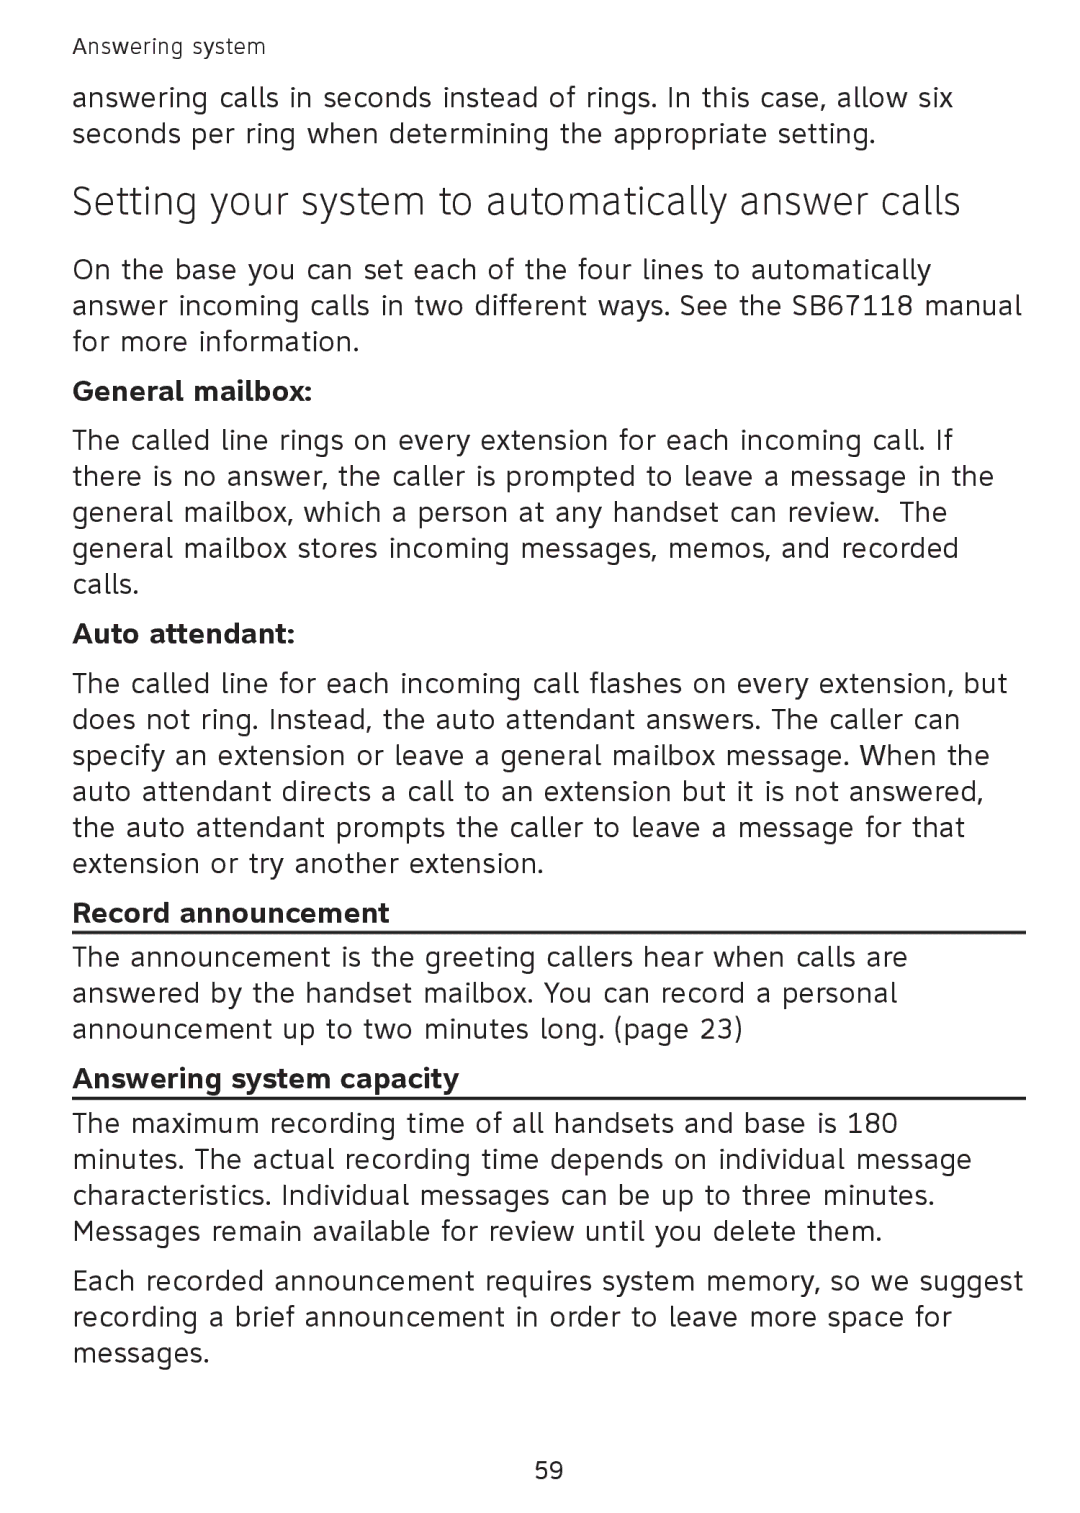 AT&T SB67108 Setting your system to automatically answer calls, General mailbox, Auto attendant, Record announcement 